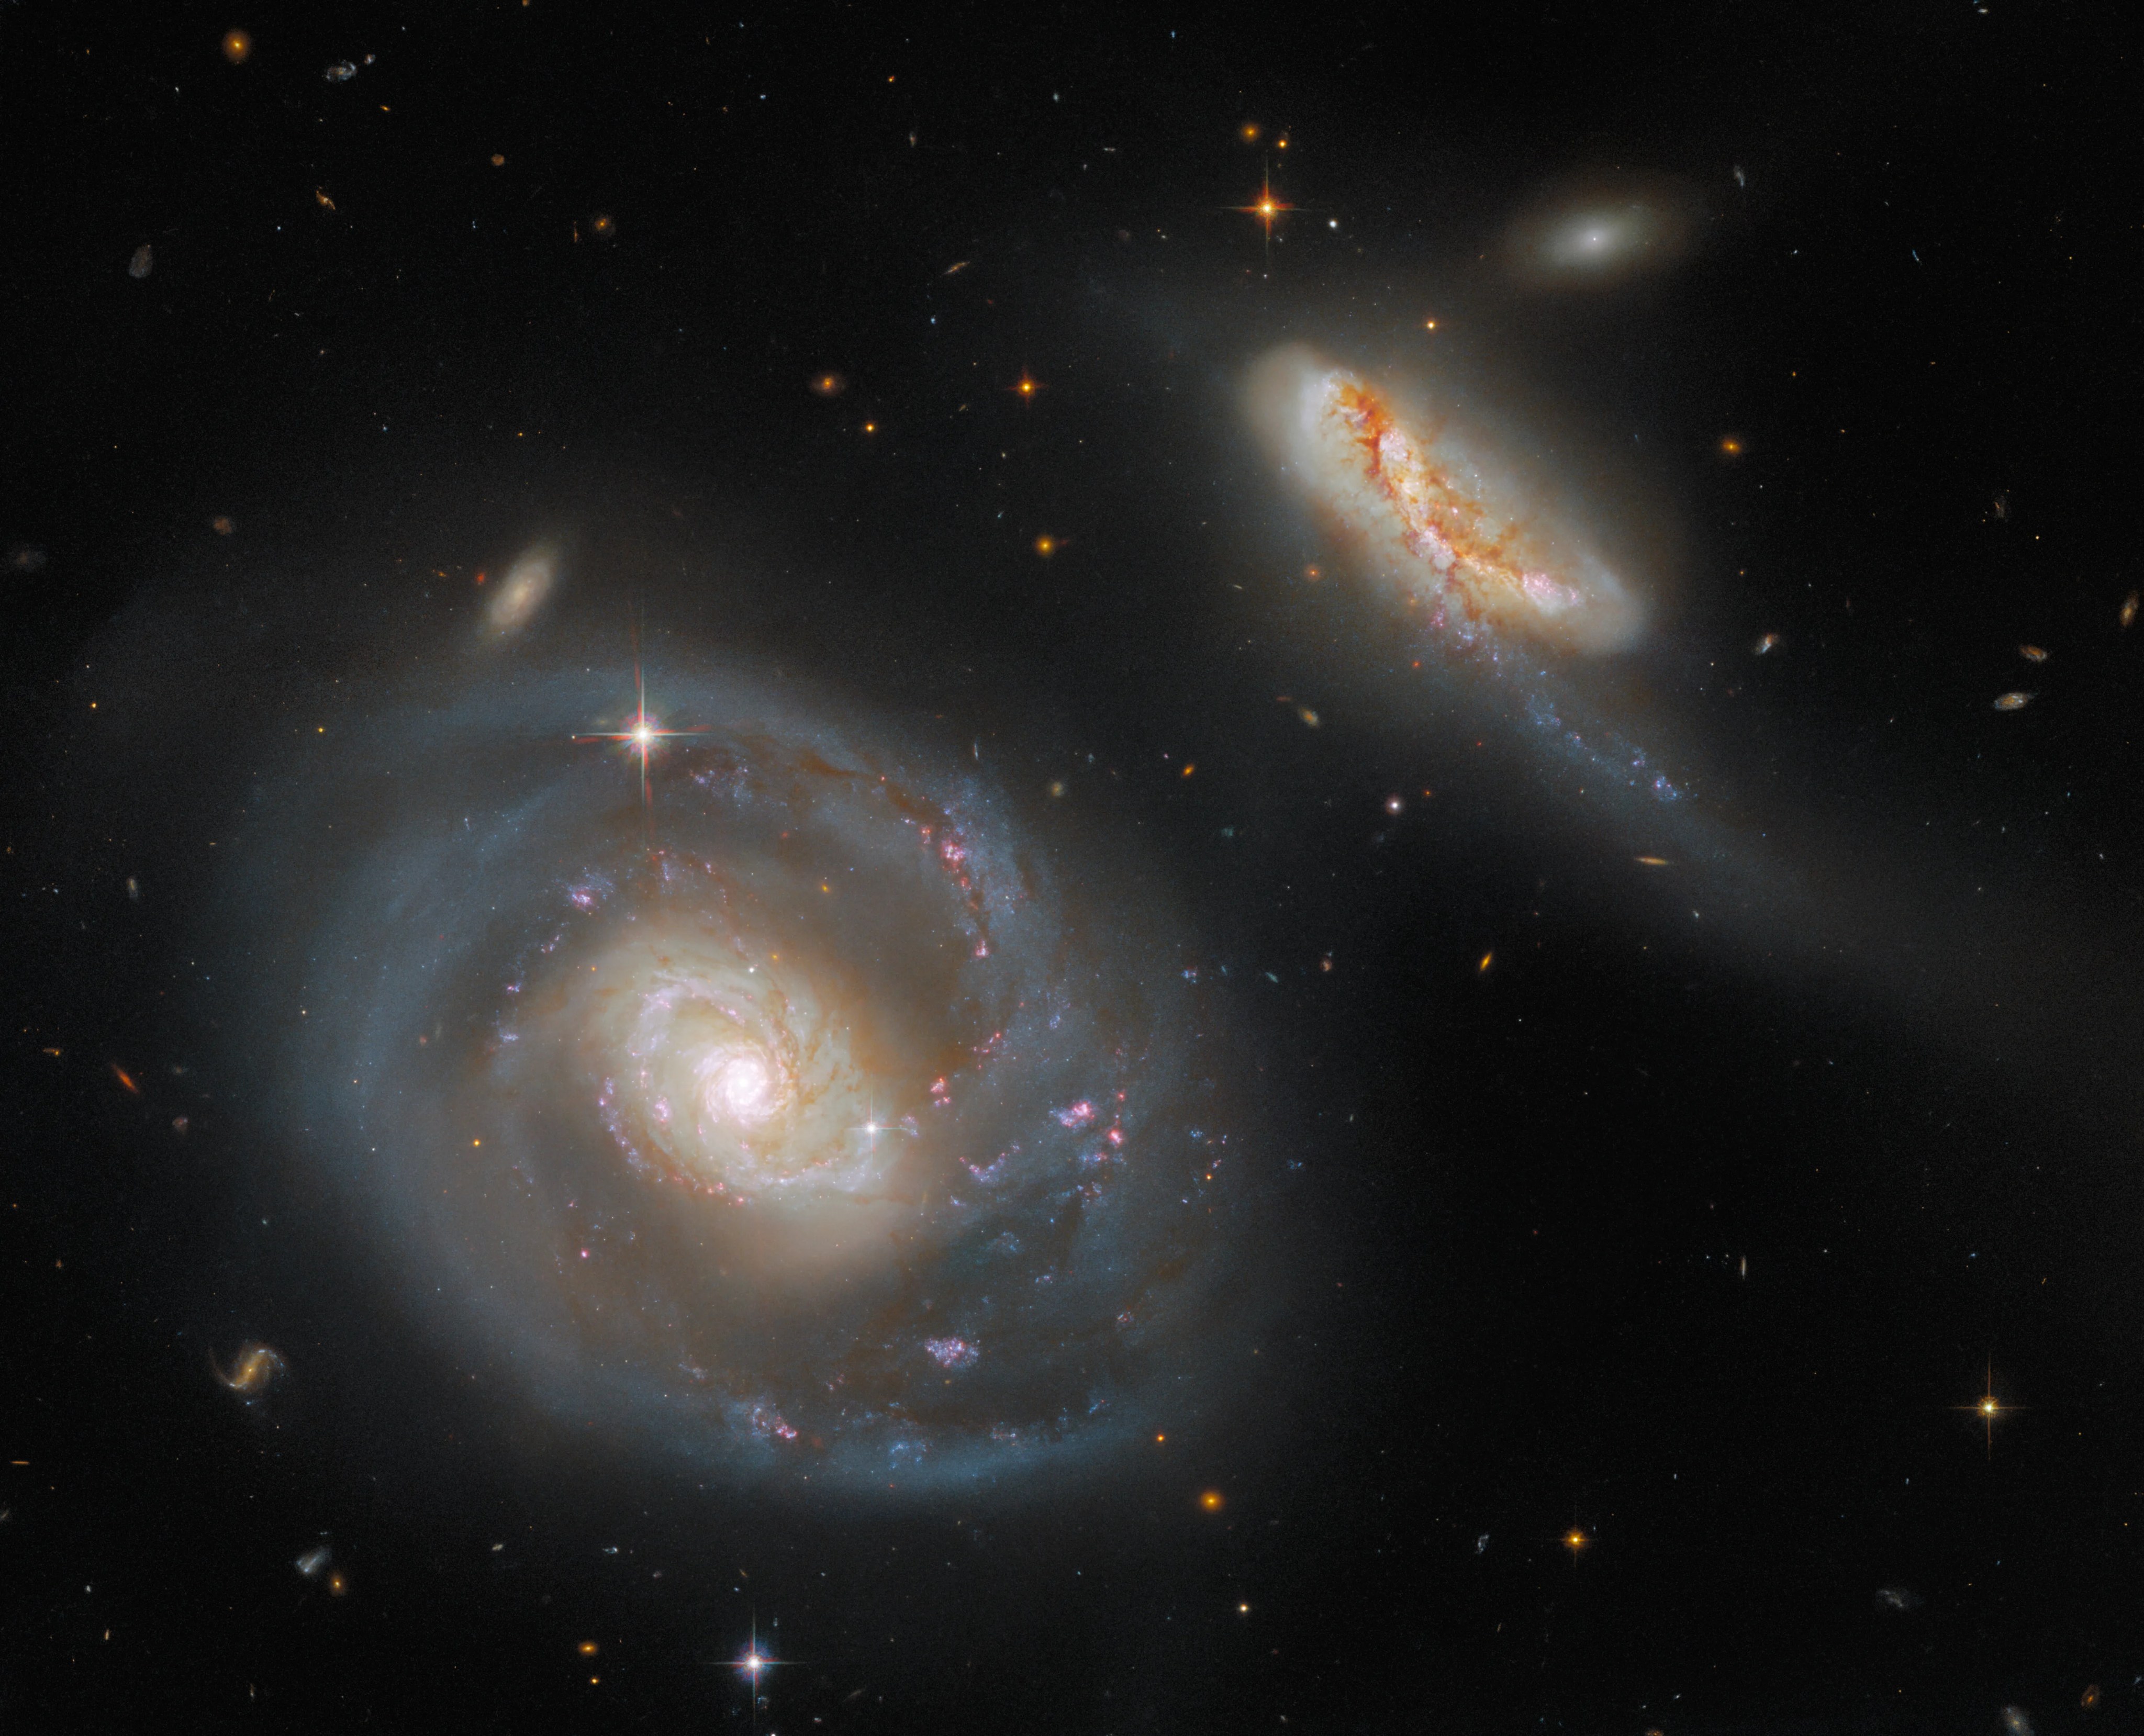 Large face-on spiral galaxy on the lower-left half of the image with a smaller galaxy in the upper left. several smaller galaxies are seen in the background